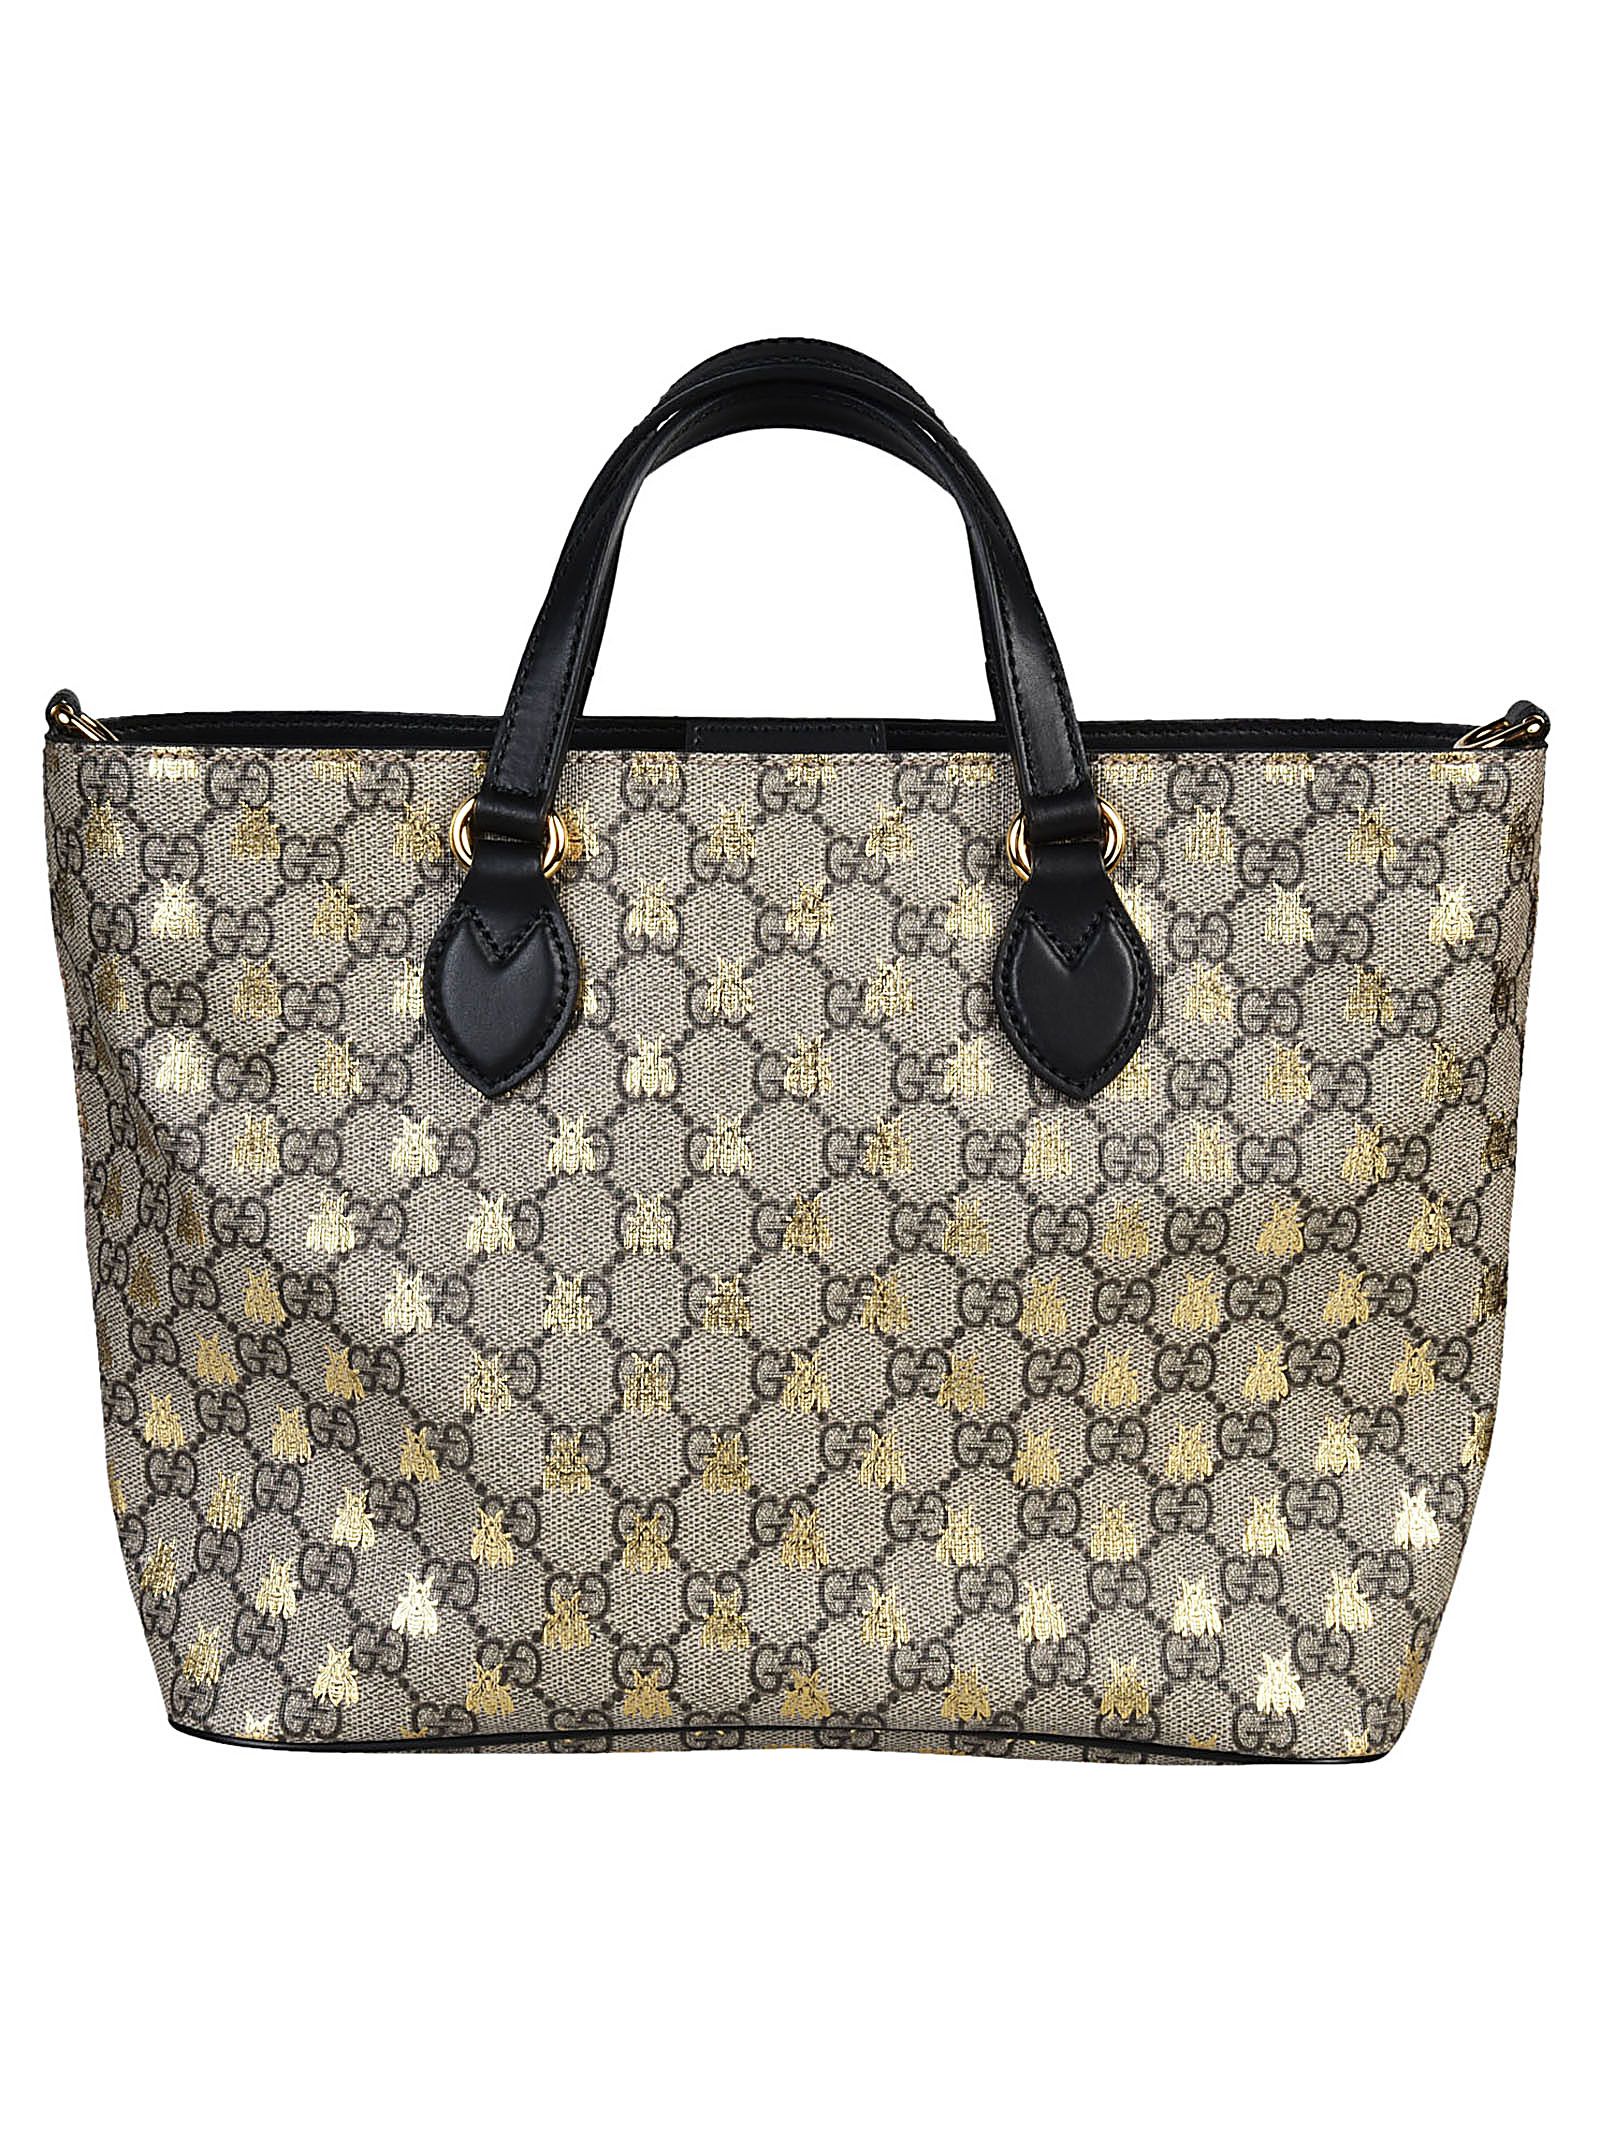 italist | Best price in the market for Gucci Gucci Supreme Bees Tote - Beige - 10537107 | italist